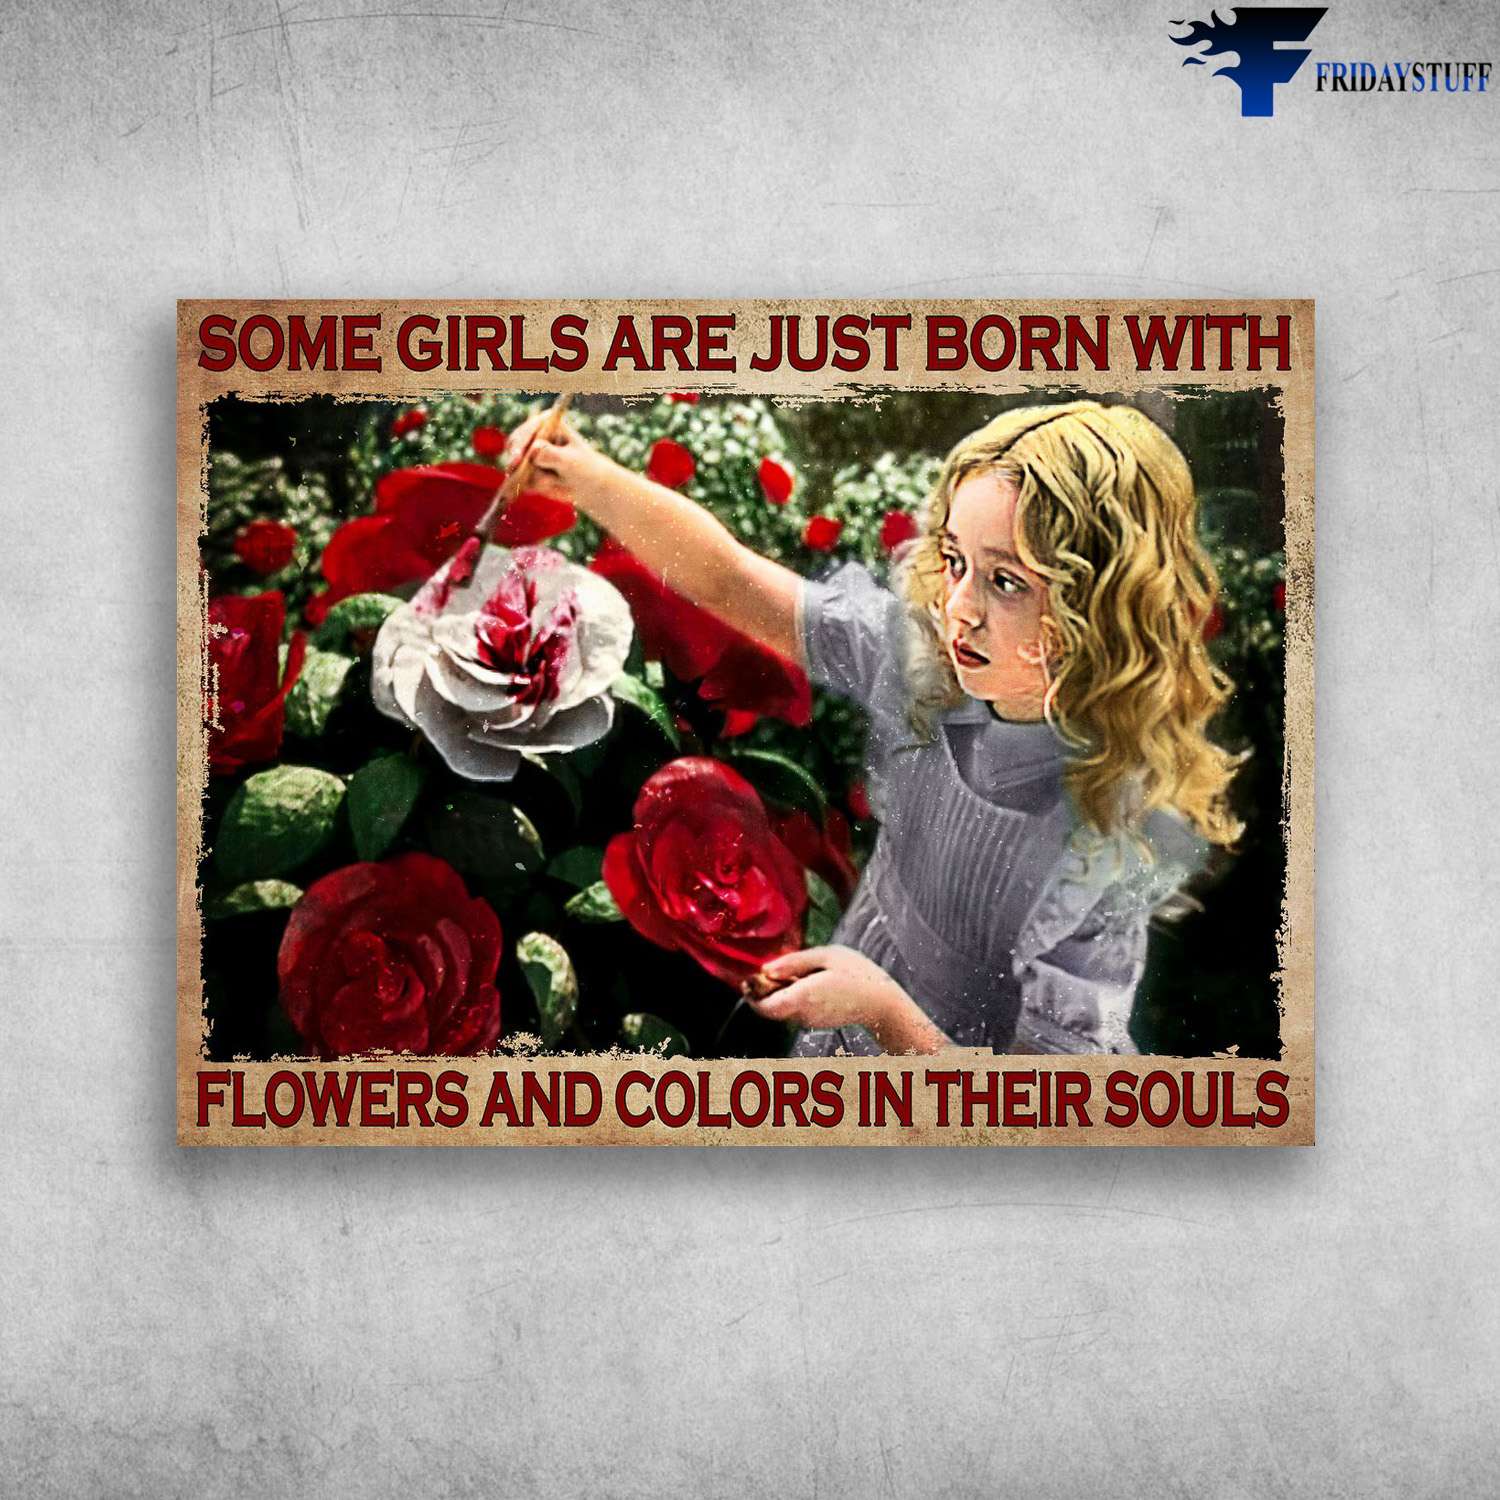 Flower Lover, Flower And Color - Some Girl Are Just Born With, Flower And Color In Their Souls